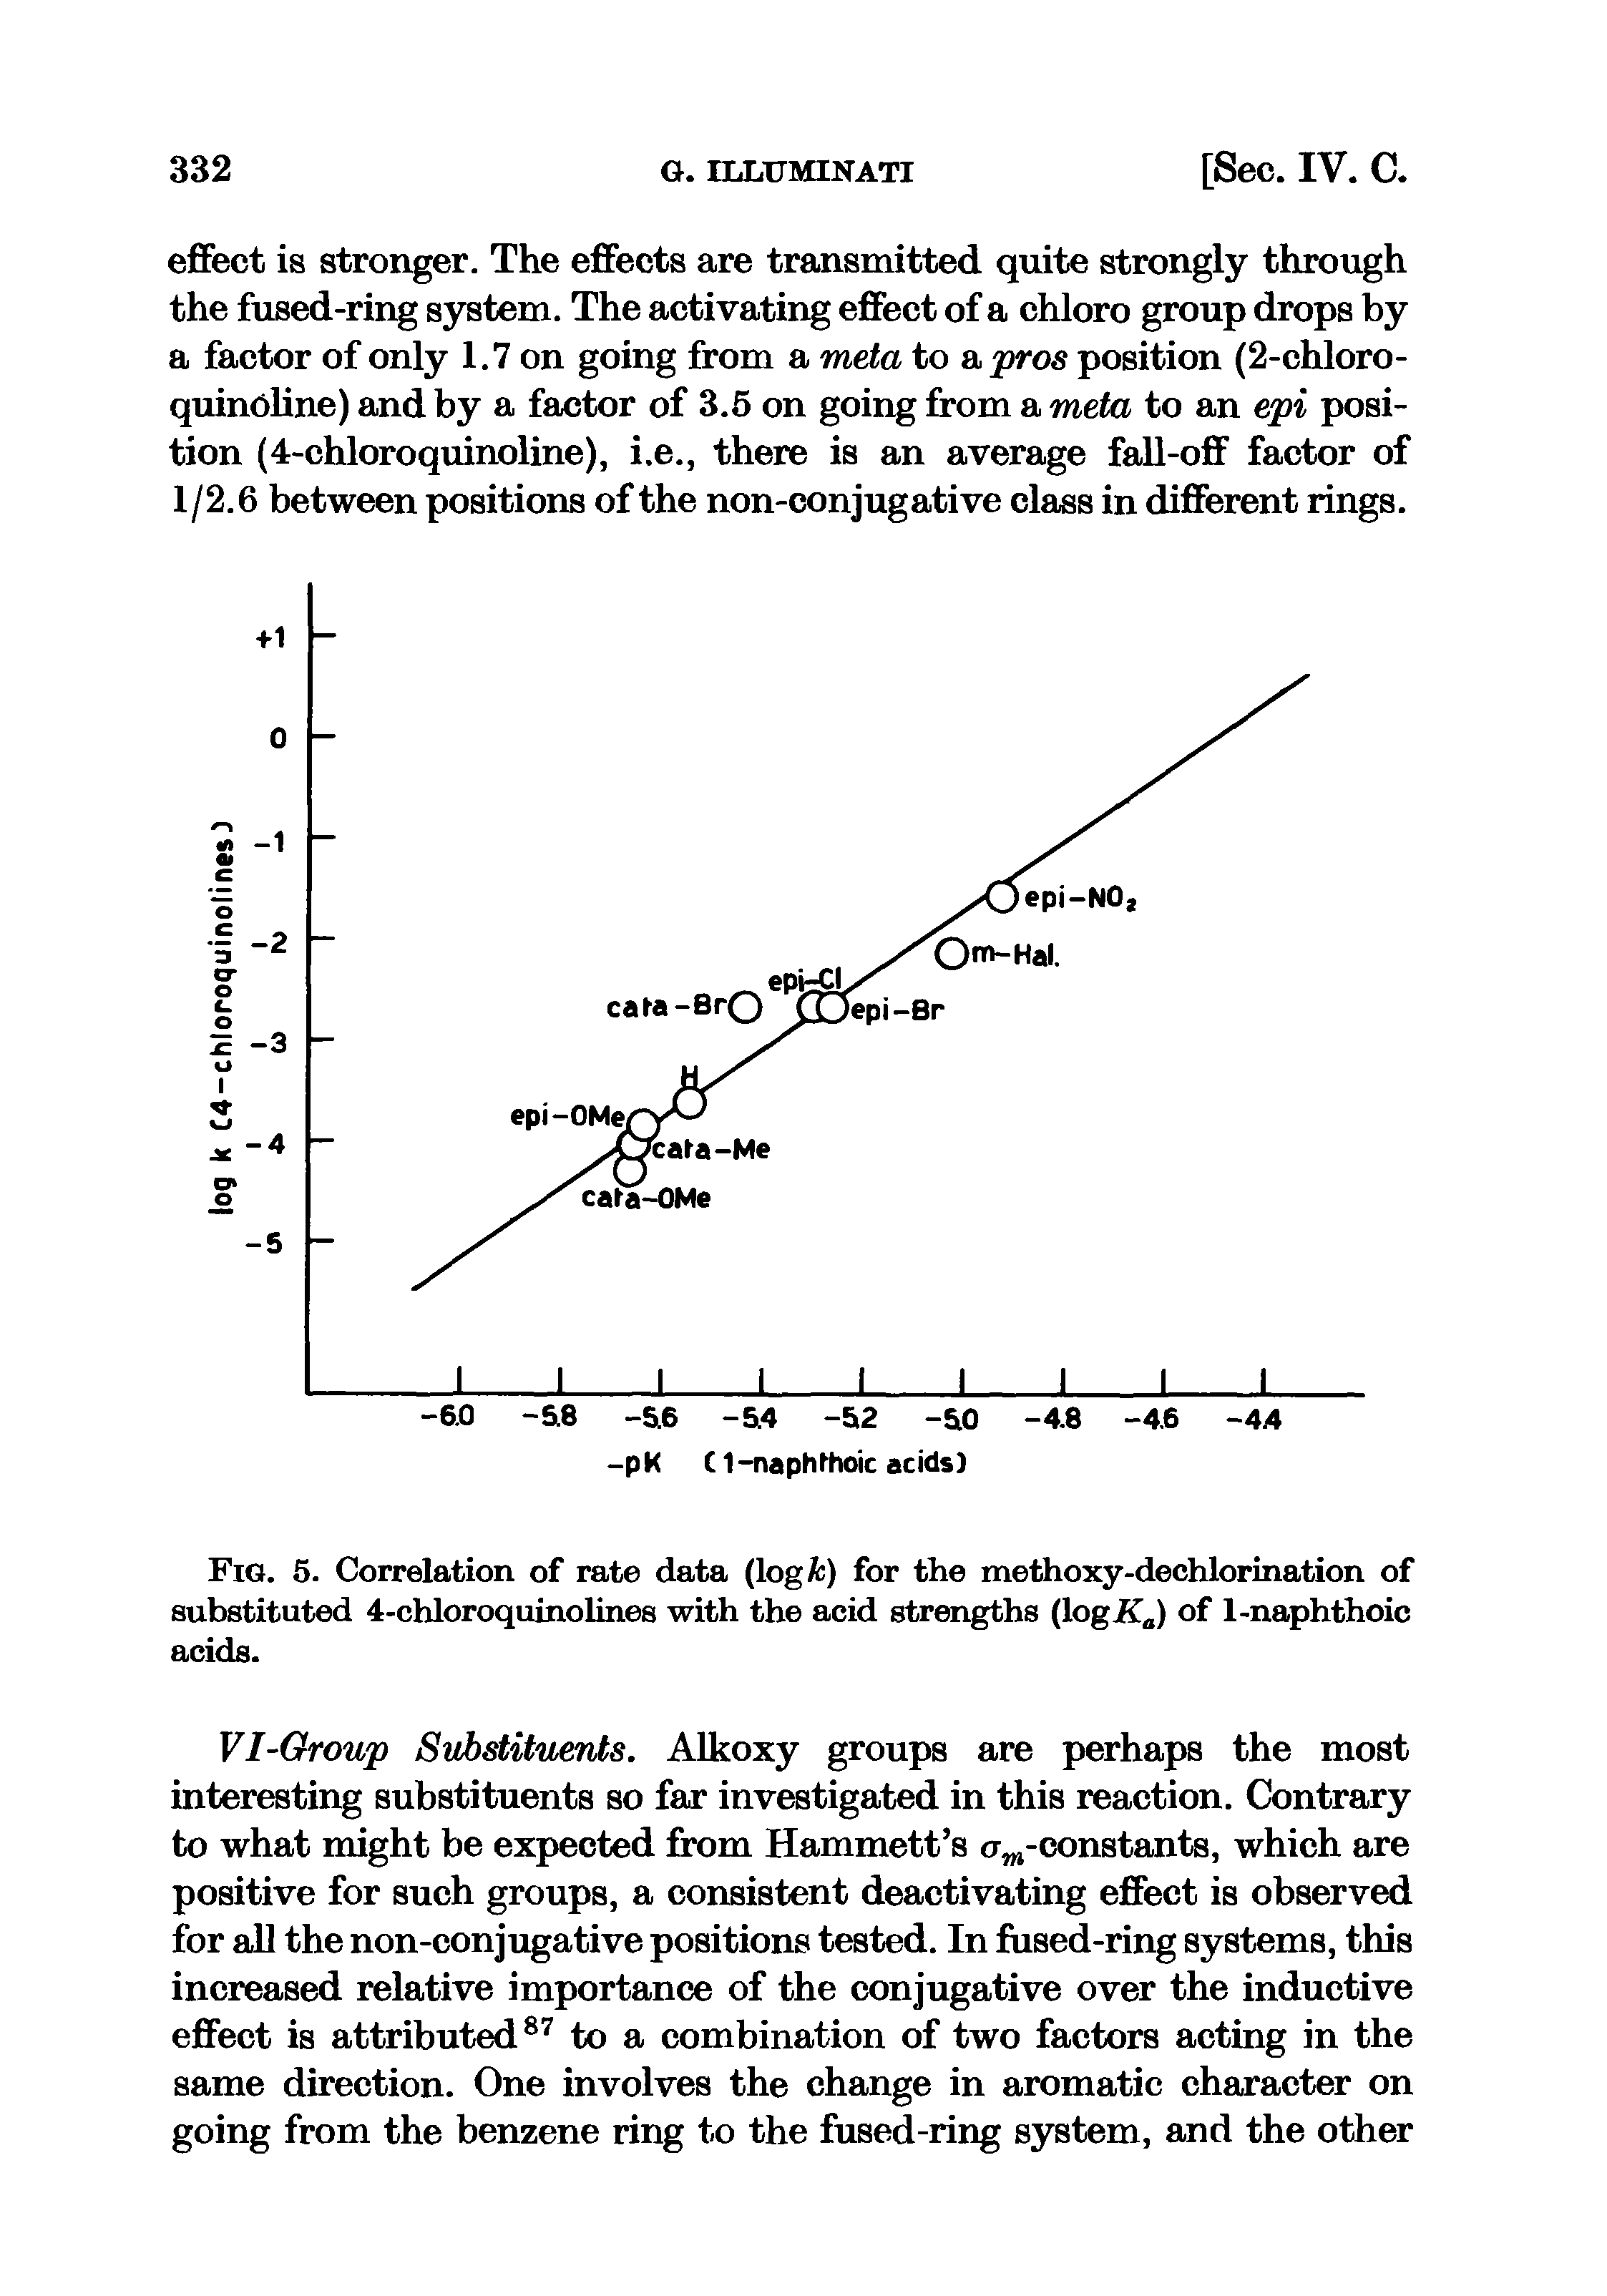 Fig. 5. Correlation of rate data (log A ) for the methoxy-dechlorination of substituted 4-chloroquinolmes with the acid strengths (logiC ) of 1-naphthoic acids.